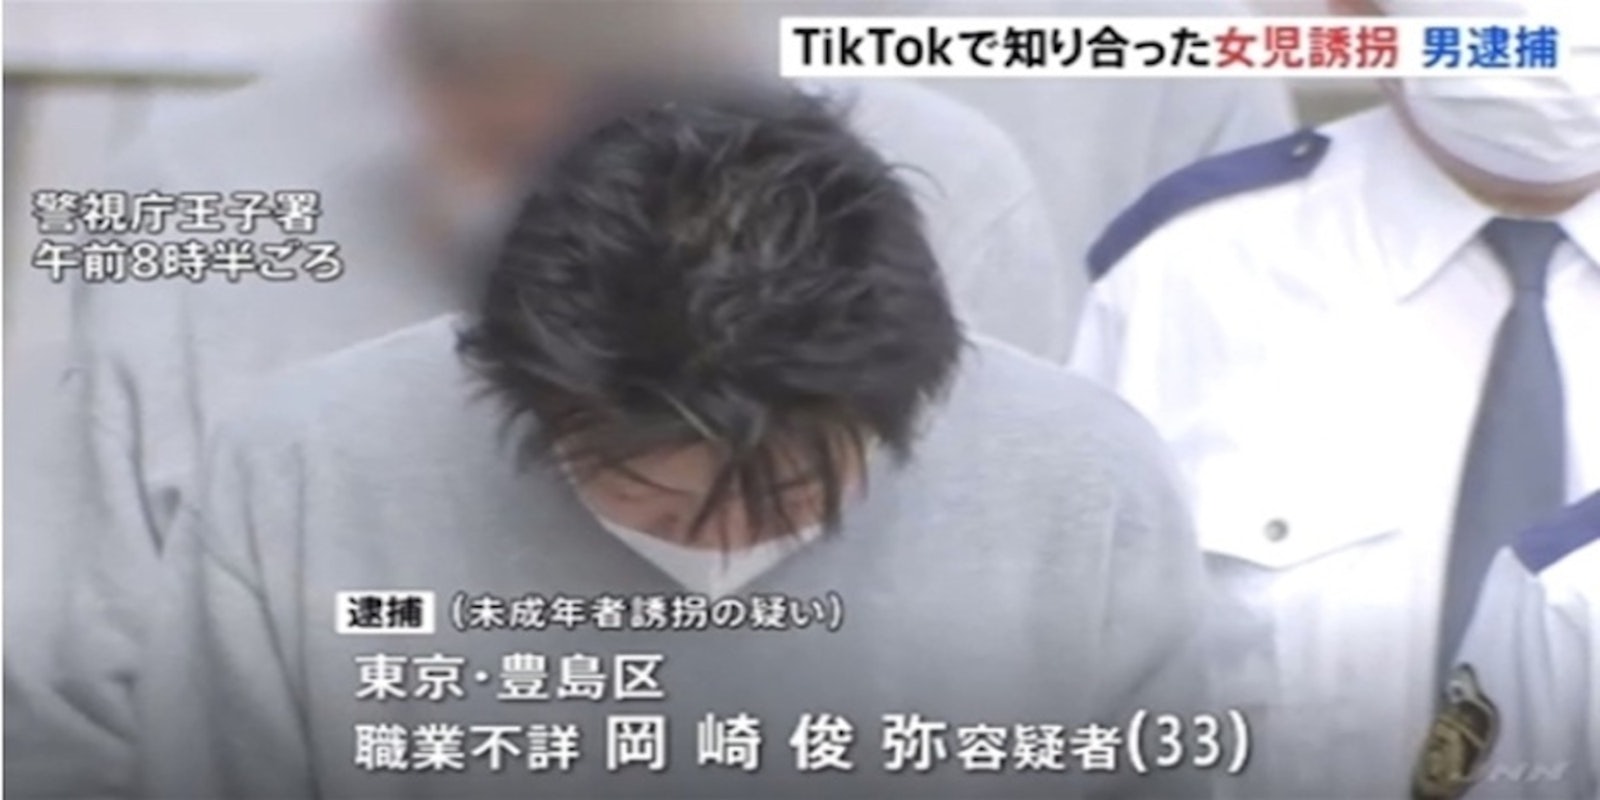 Man in Tokyo wearing a grey sweatshirt and white mask with his hands behind his back after being arrested for kidnapping girl he met on TikTok